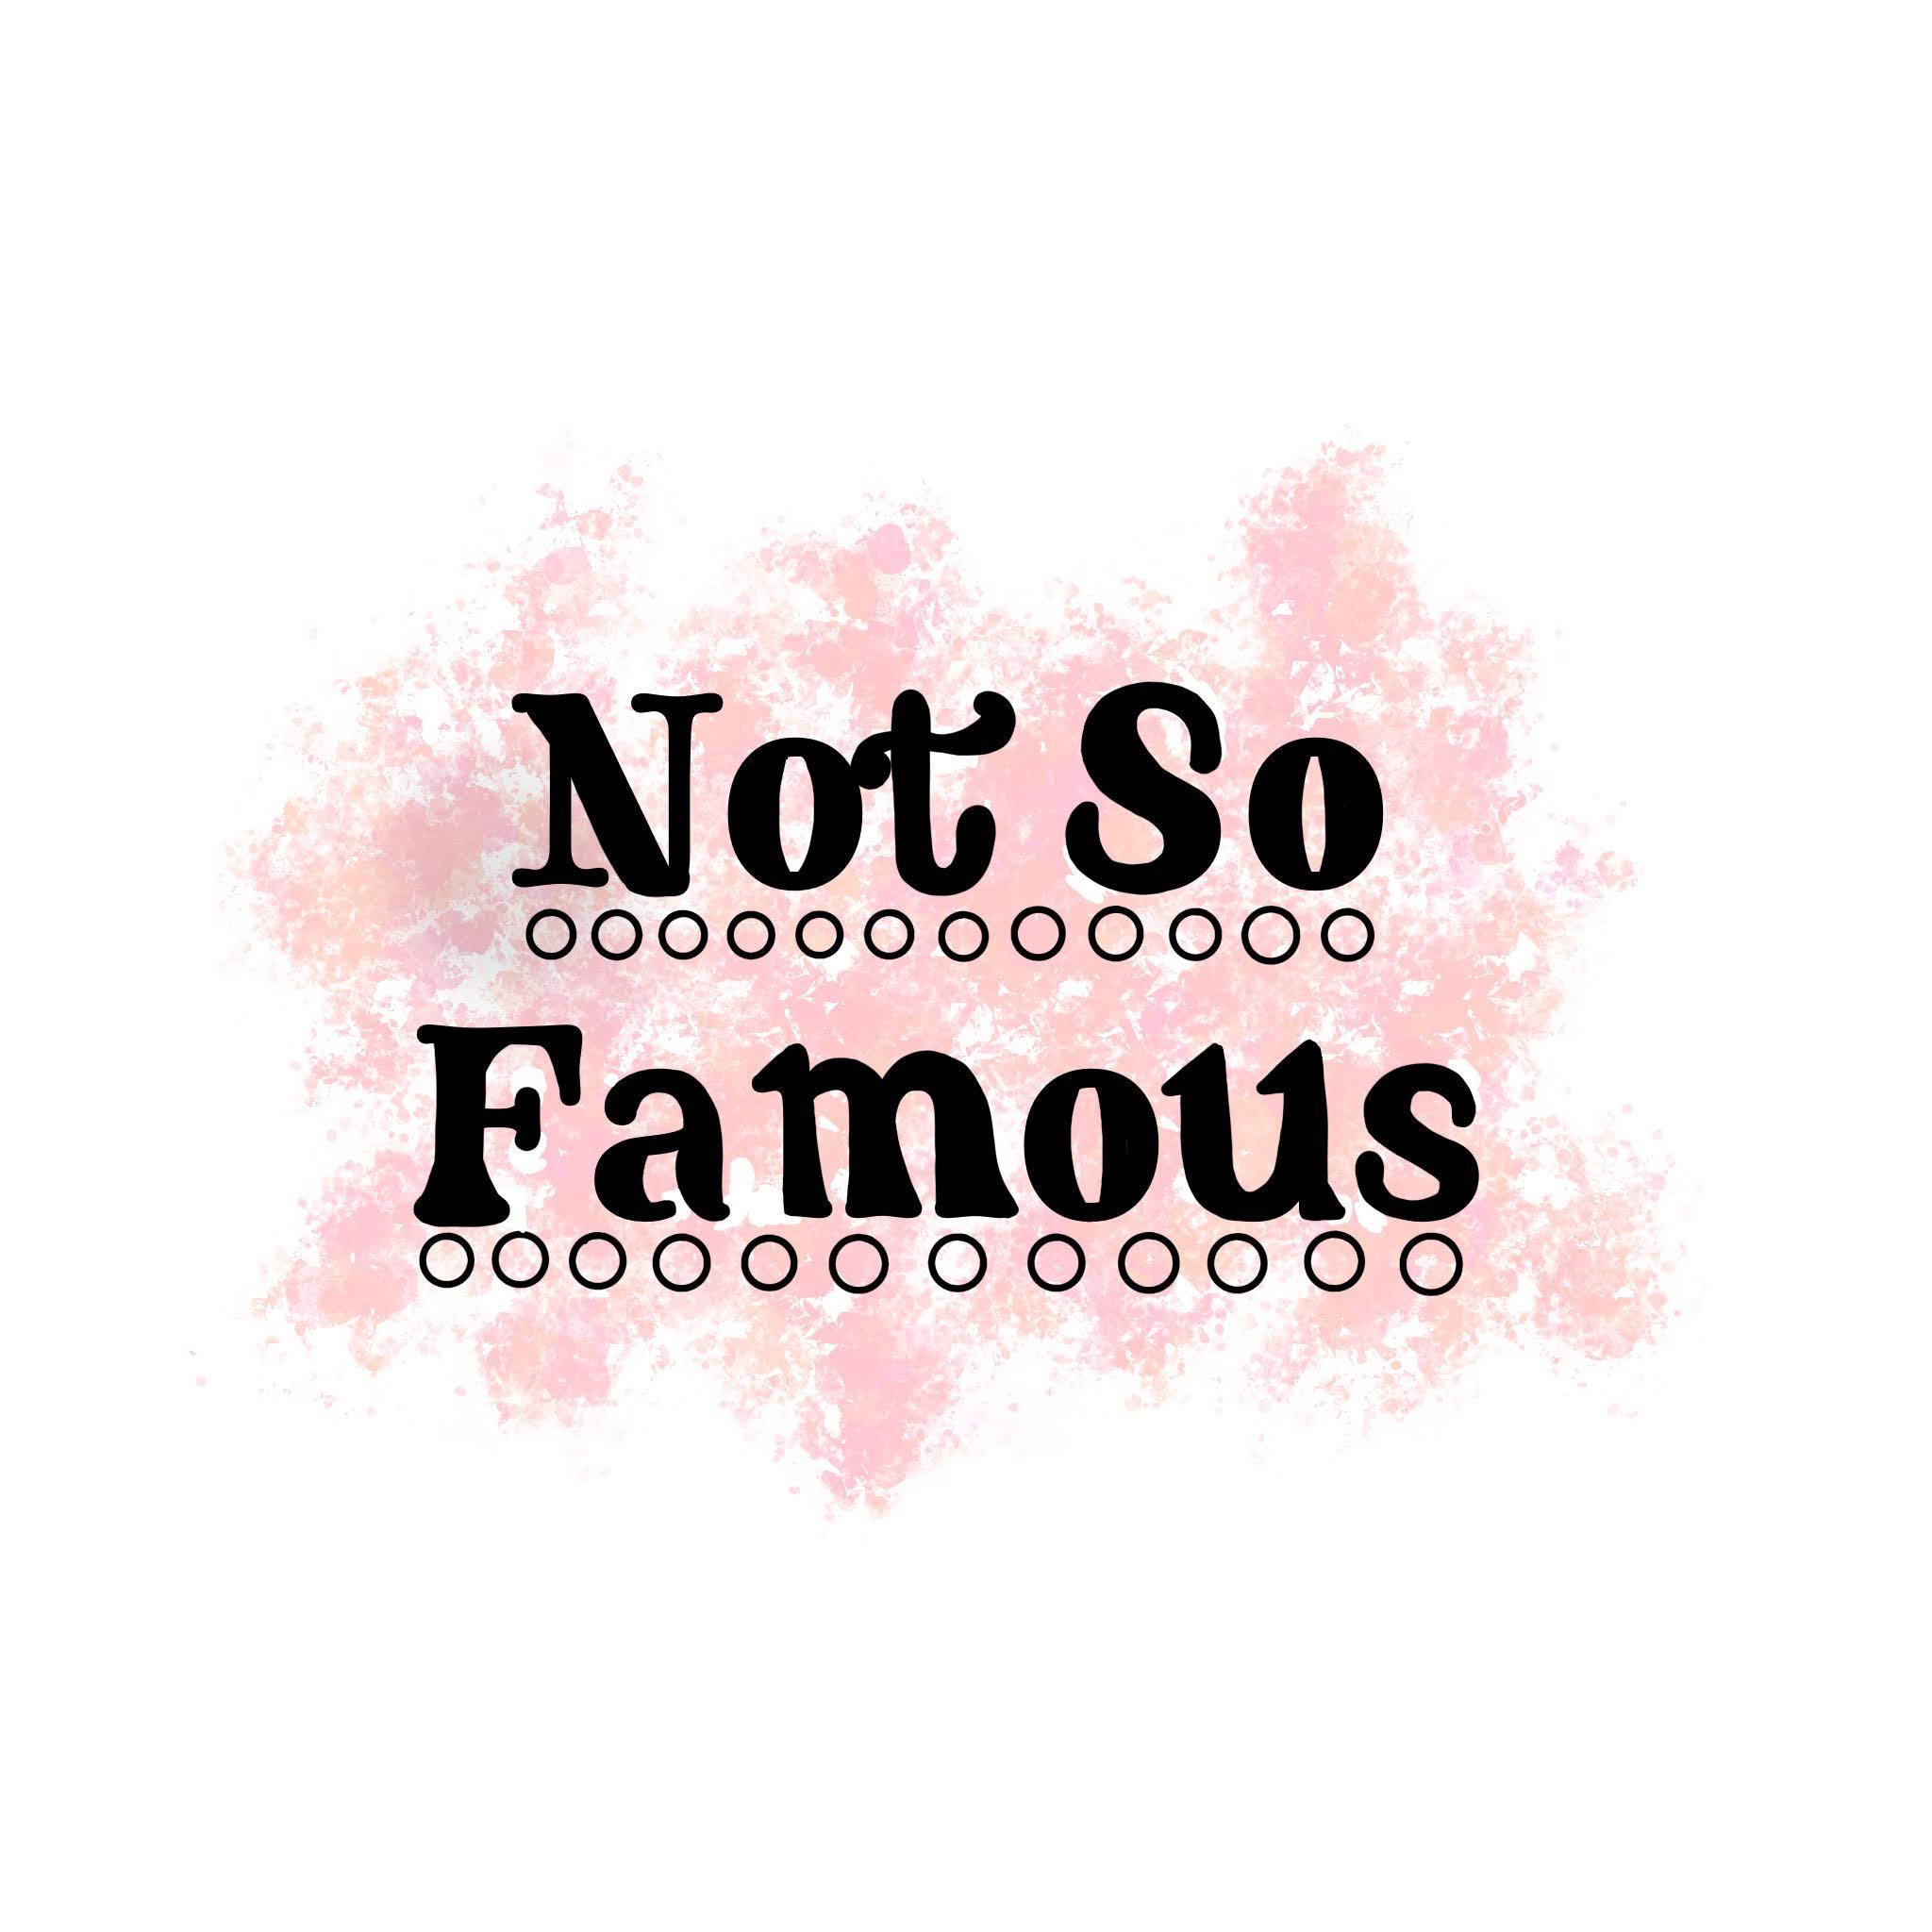 Not So Famous